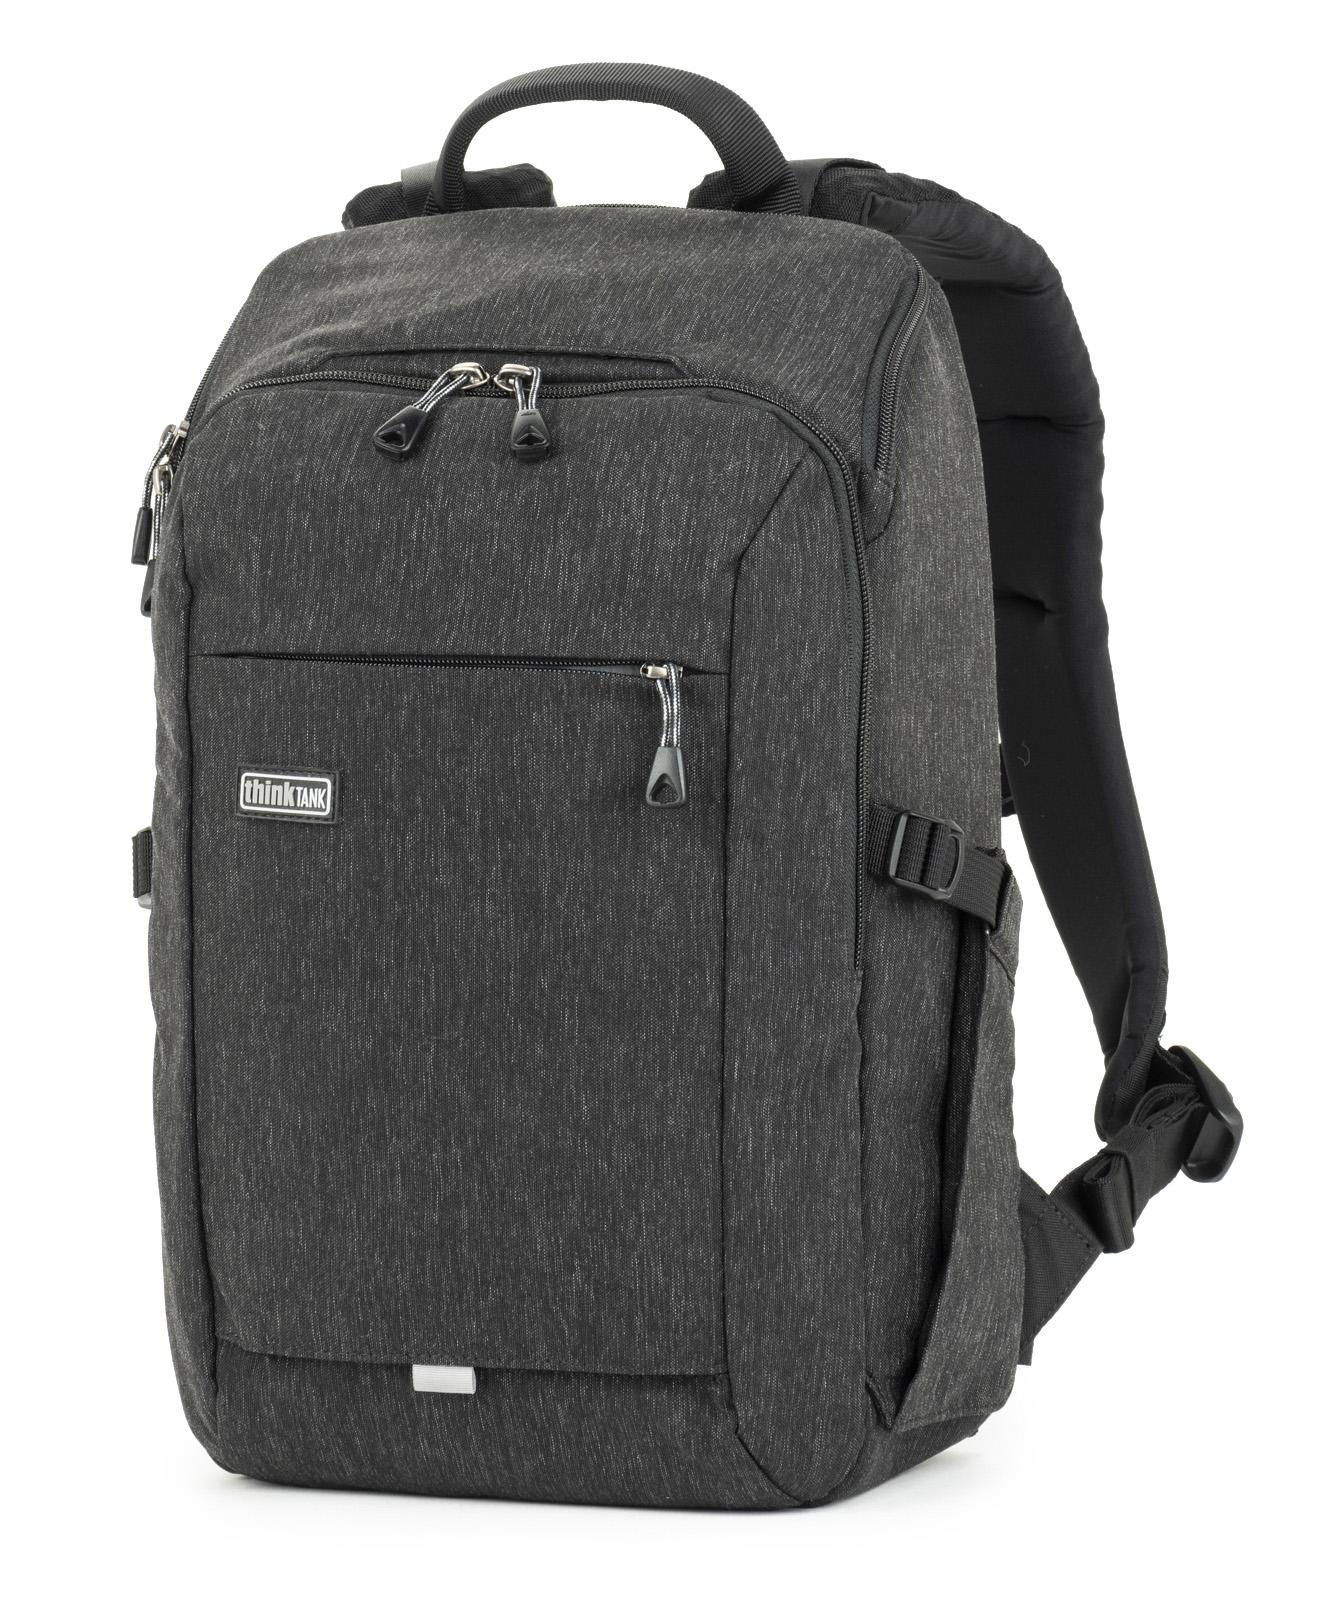 BackStory 13 backpack by Think Tank Photo